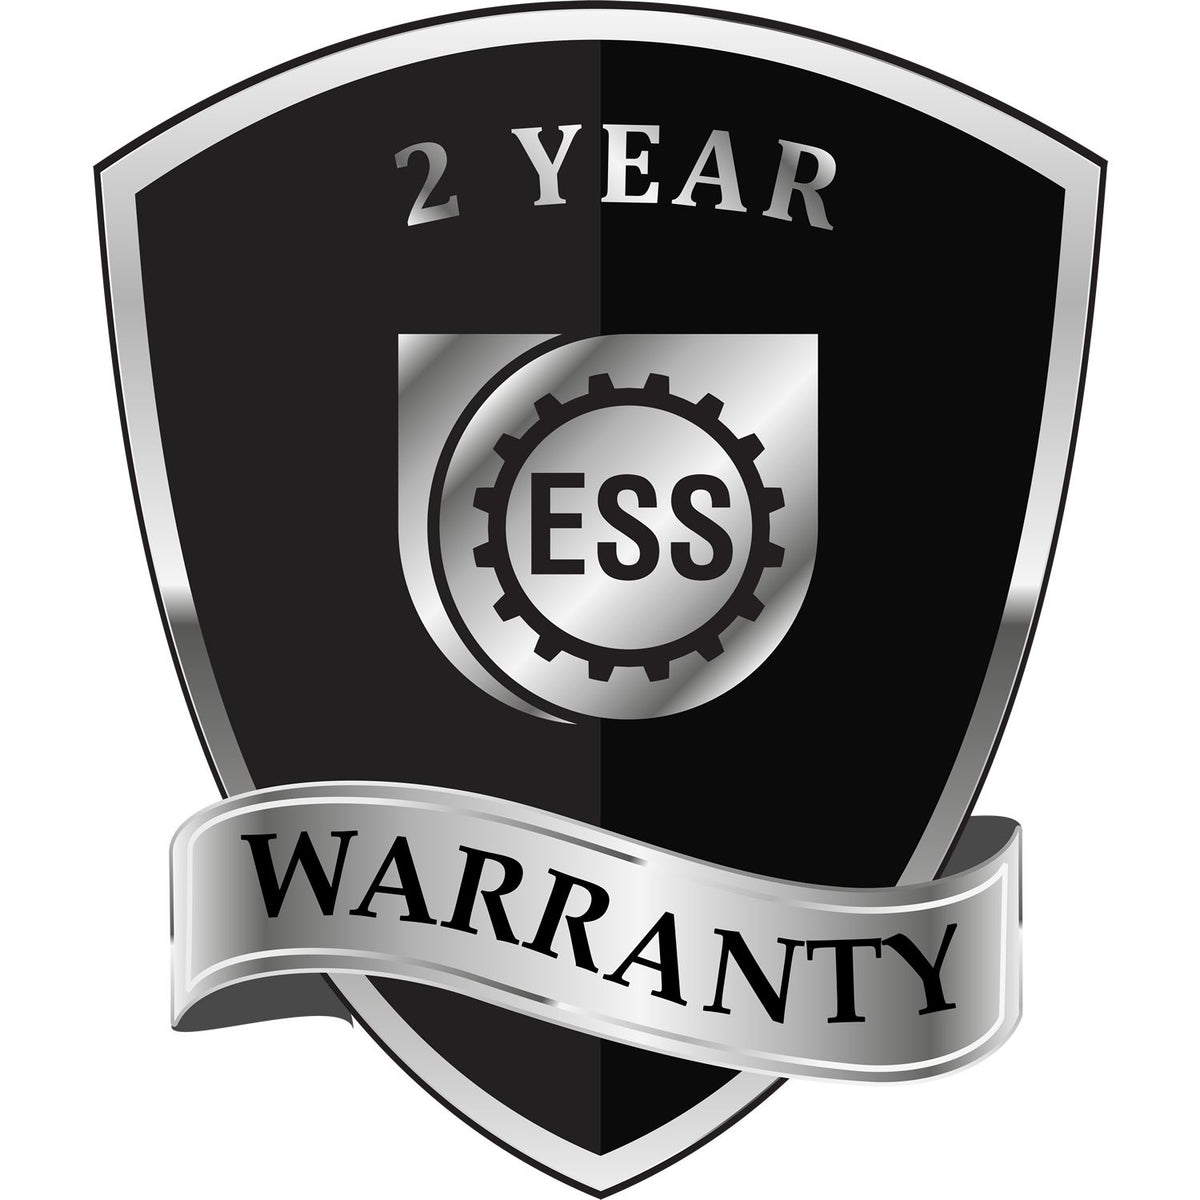 A badge or emblem showing a warranty icon for the Long Reach Texas PE Seal